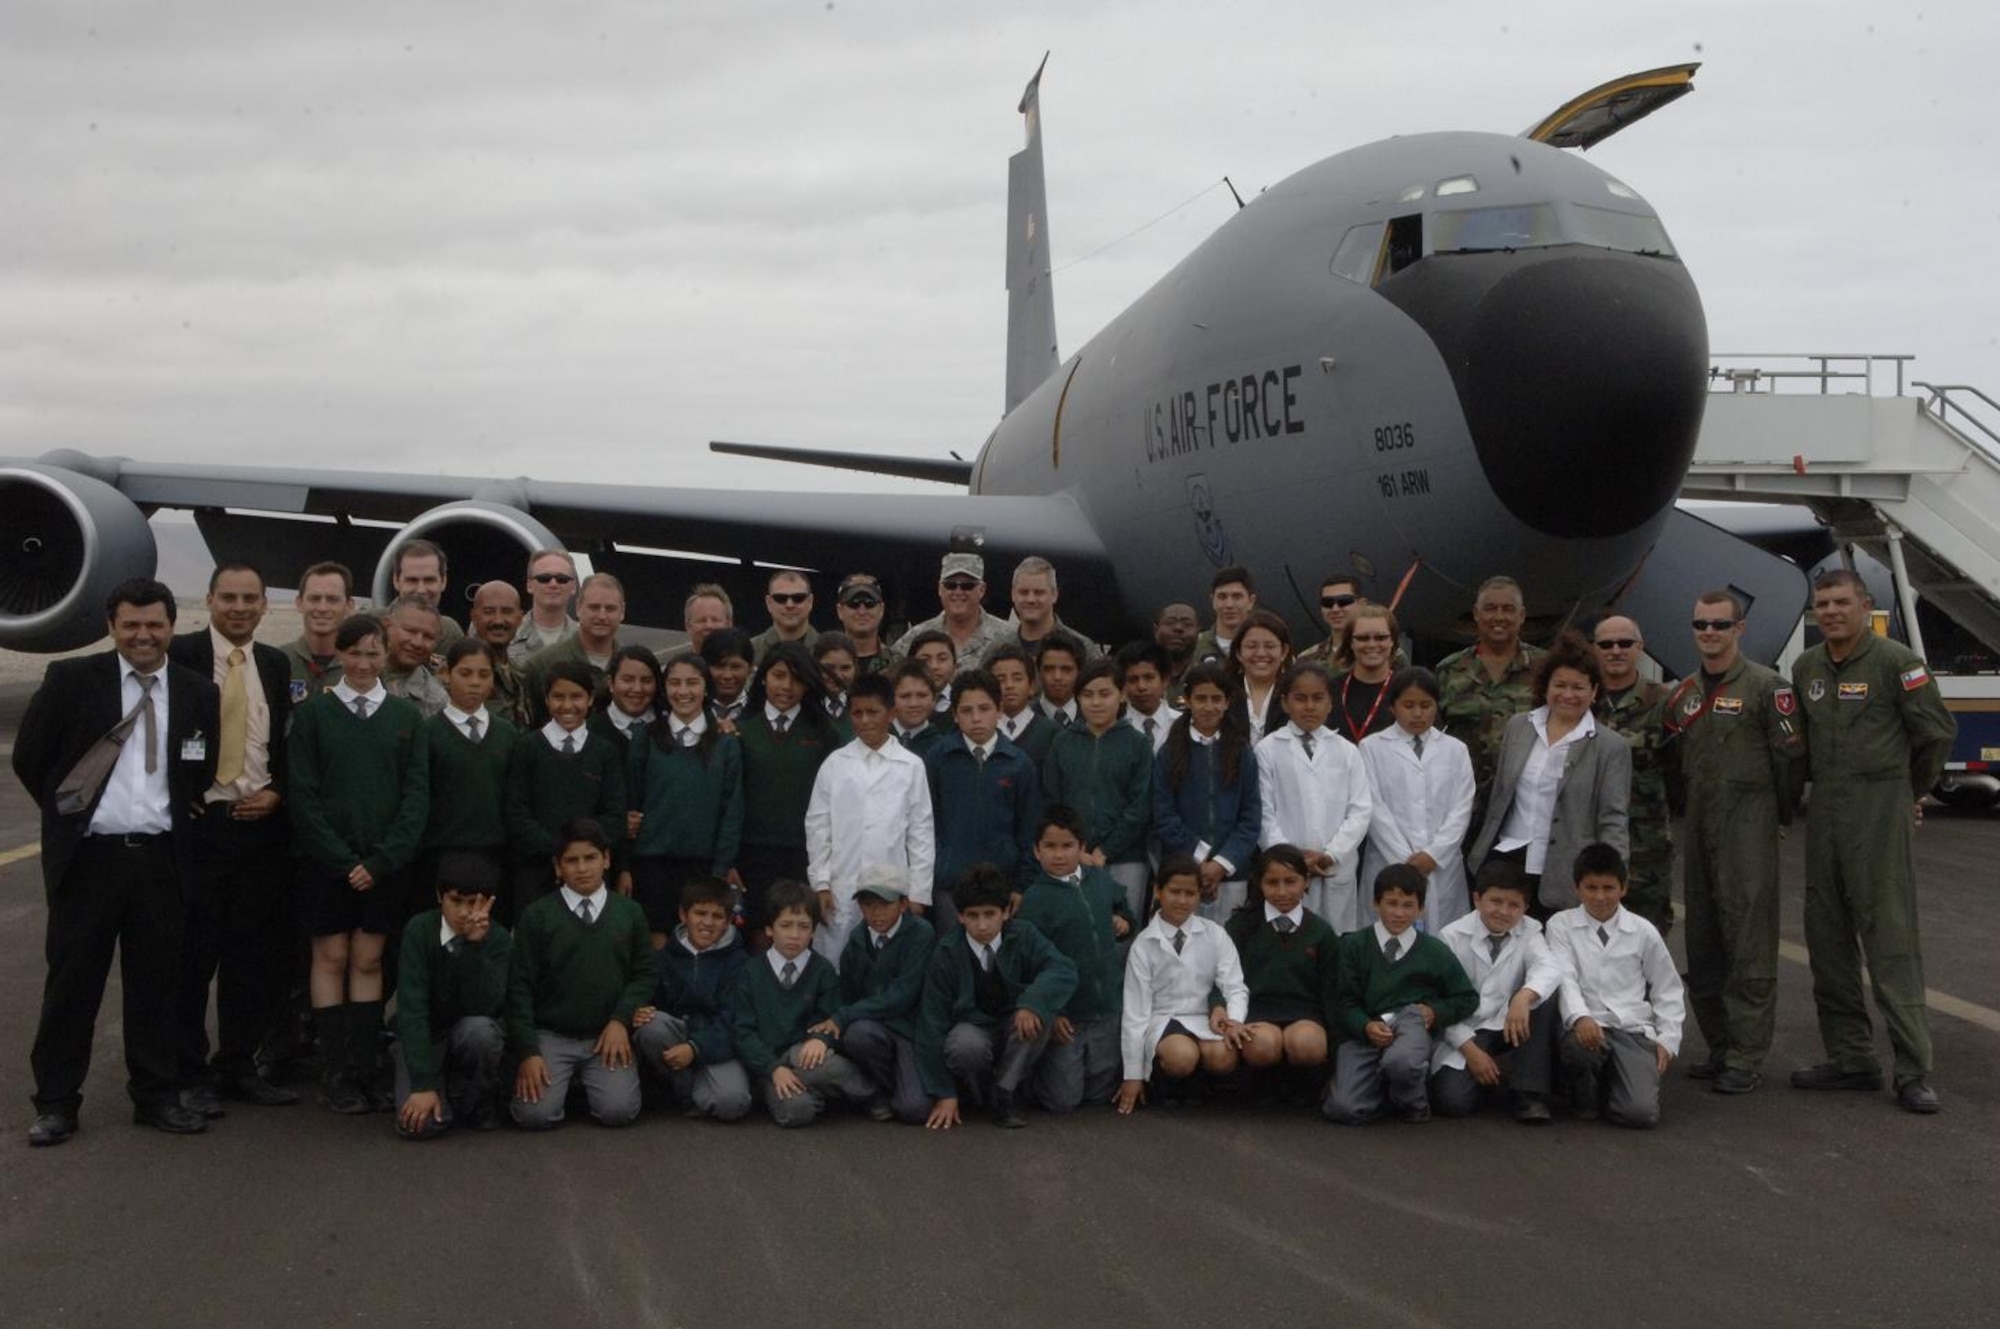 IQUIQUE, Chile -- Chilean and U.S. Airmen, children and teachers from Colegio Macaya school in Alto Hospicia pose for a group photo in front of a KC-135 during a base tour here Oct. 30. Students were invited to the base to see U.S. and Chilean Air Force aircraft, and meet Airmen. (U.S. Air Force photo by Tech. Sgt. Eric Petosky)